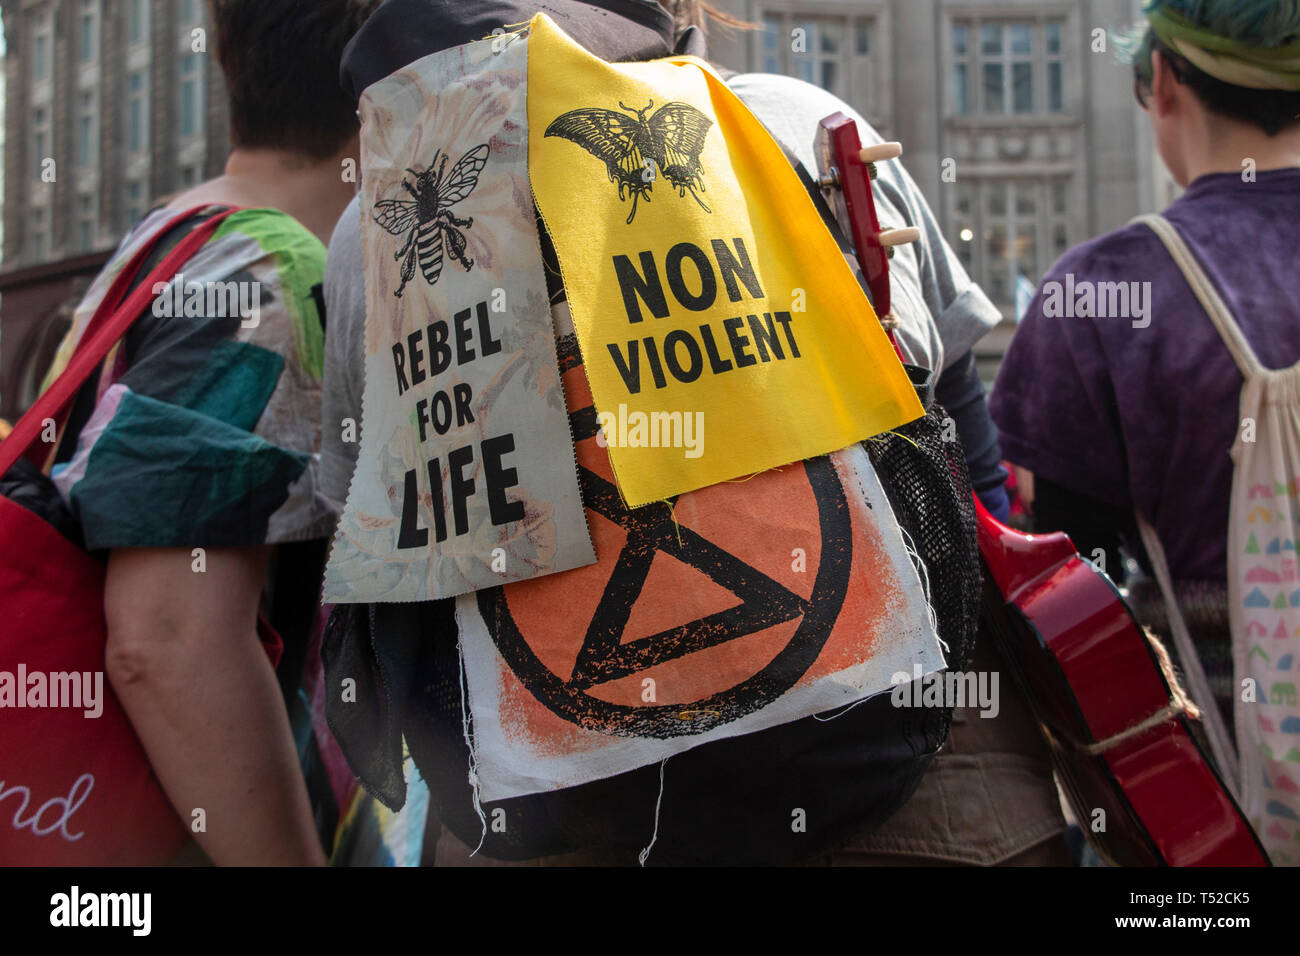 Environmental activists from Extinction Rebellion movement occupy London's Oxford Circus Stock Photo